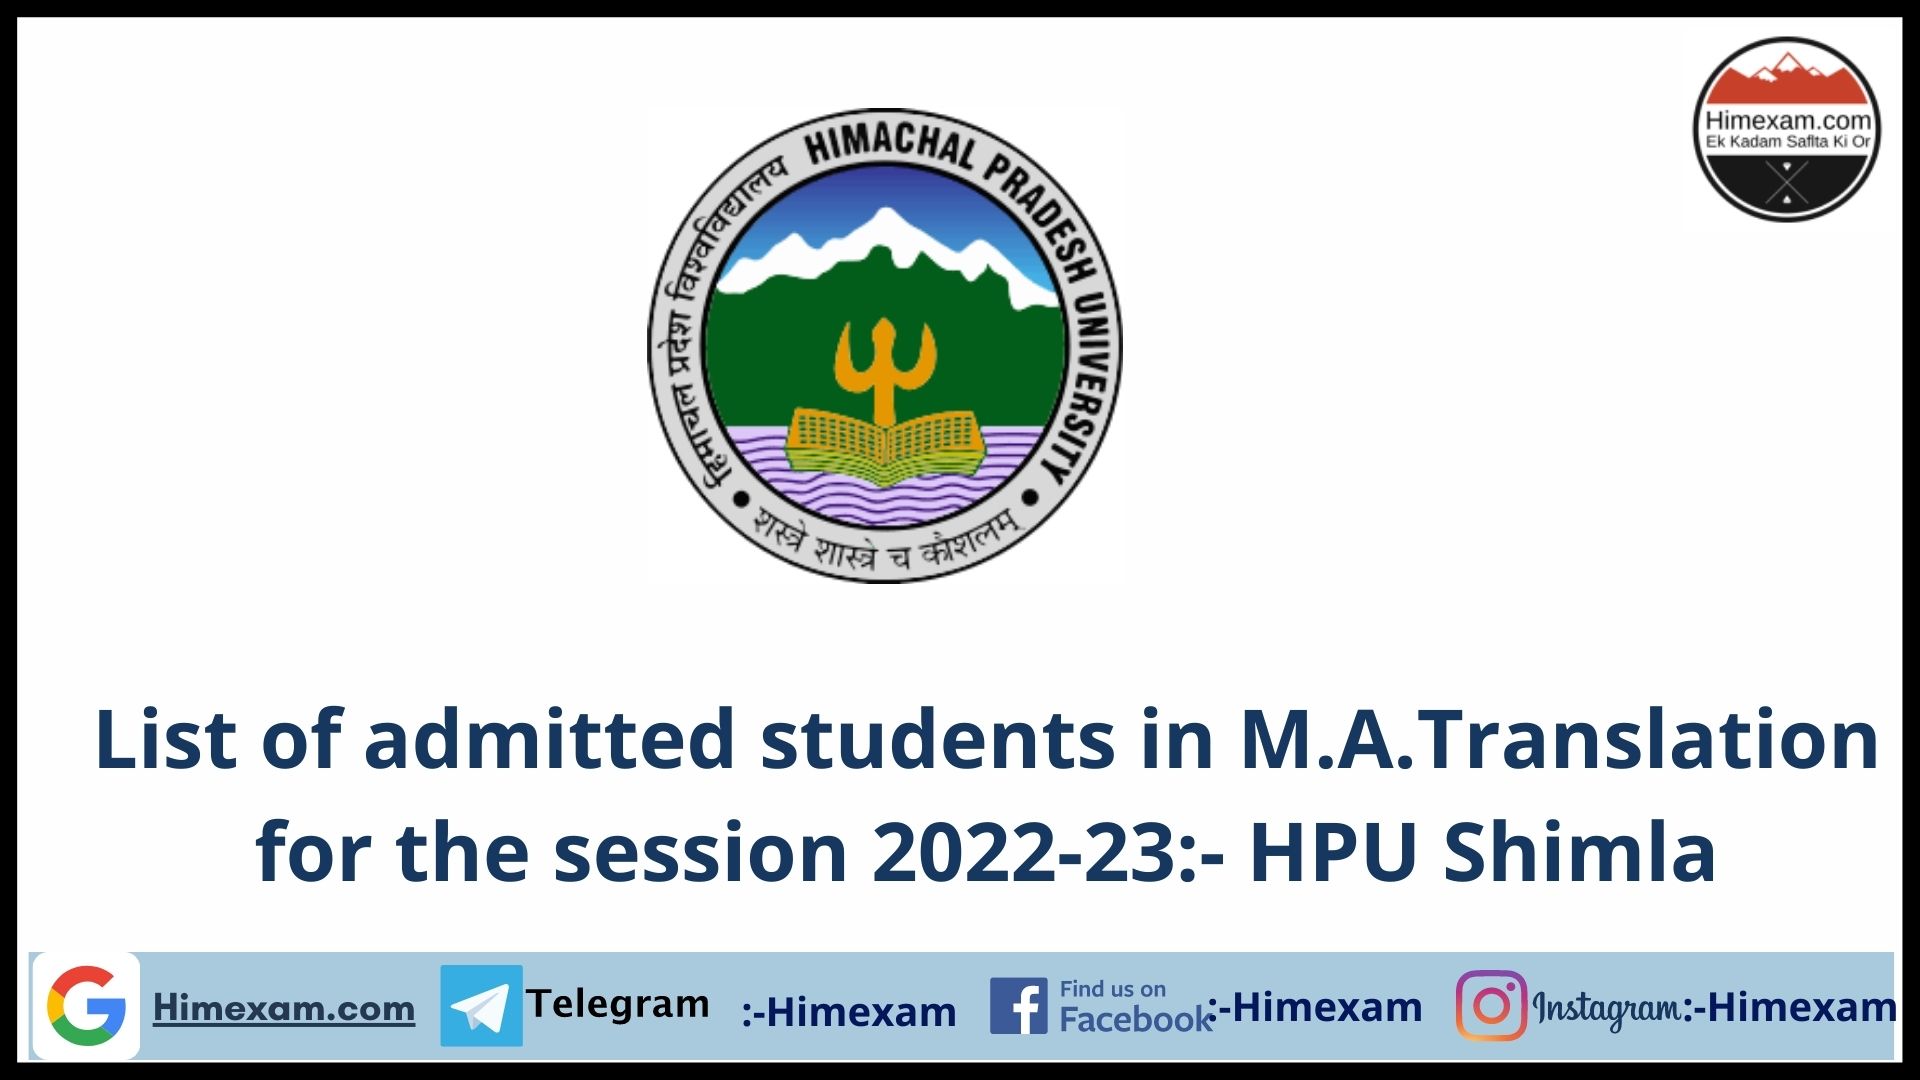 List of admitted students in M.A.Translation for the session 2022-23:- HPU Shimla